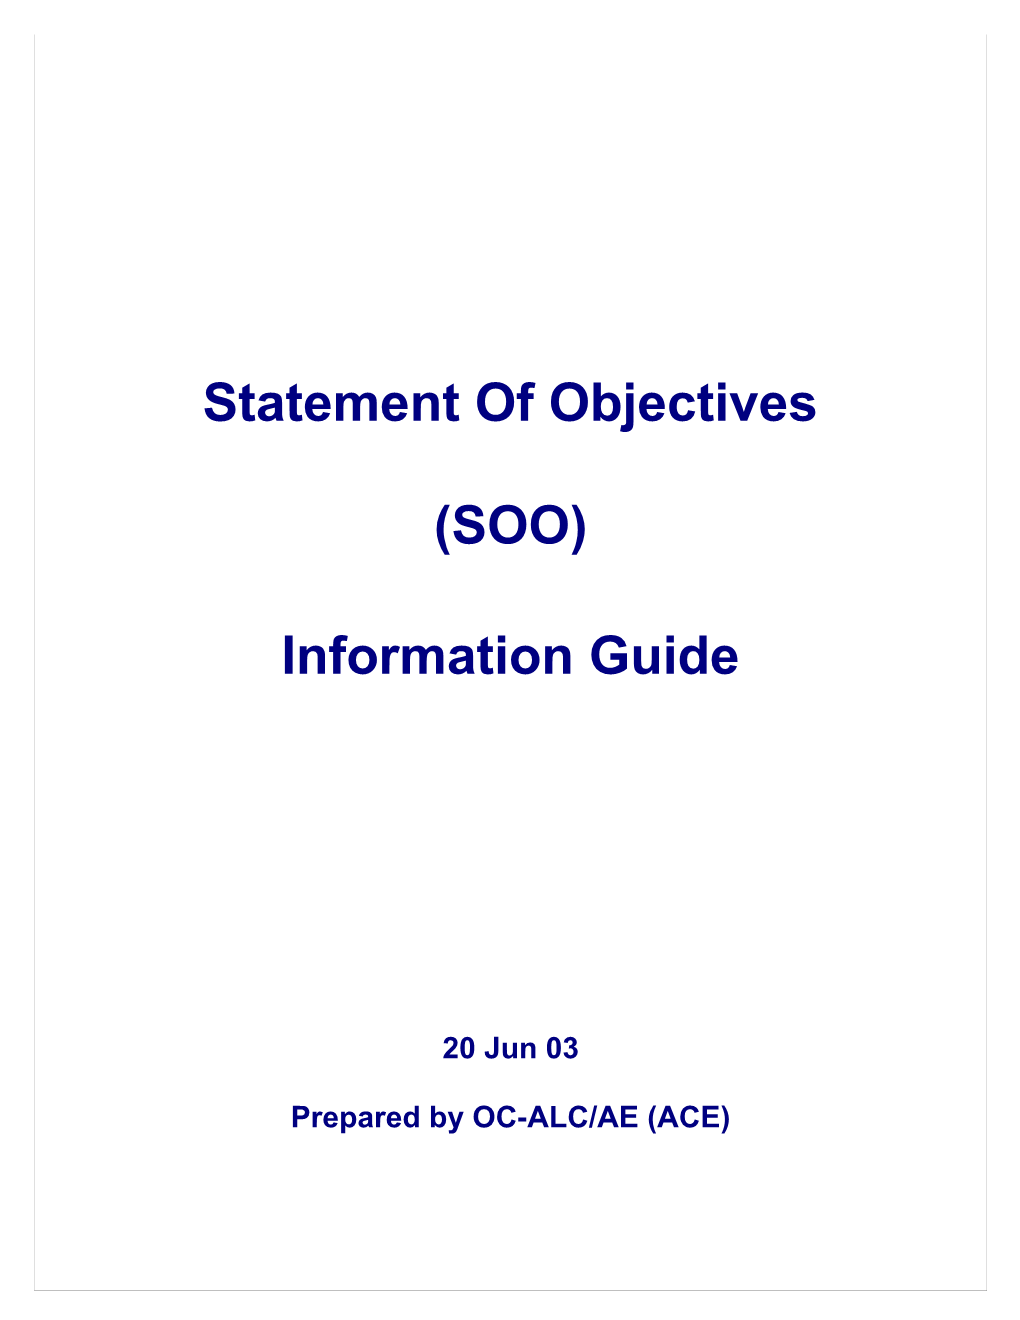 Statement of Objectives Information Guide